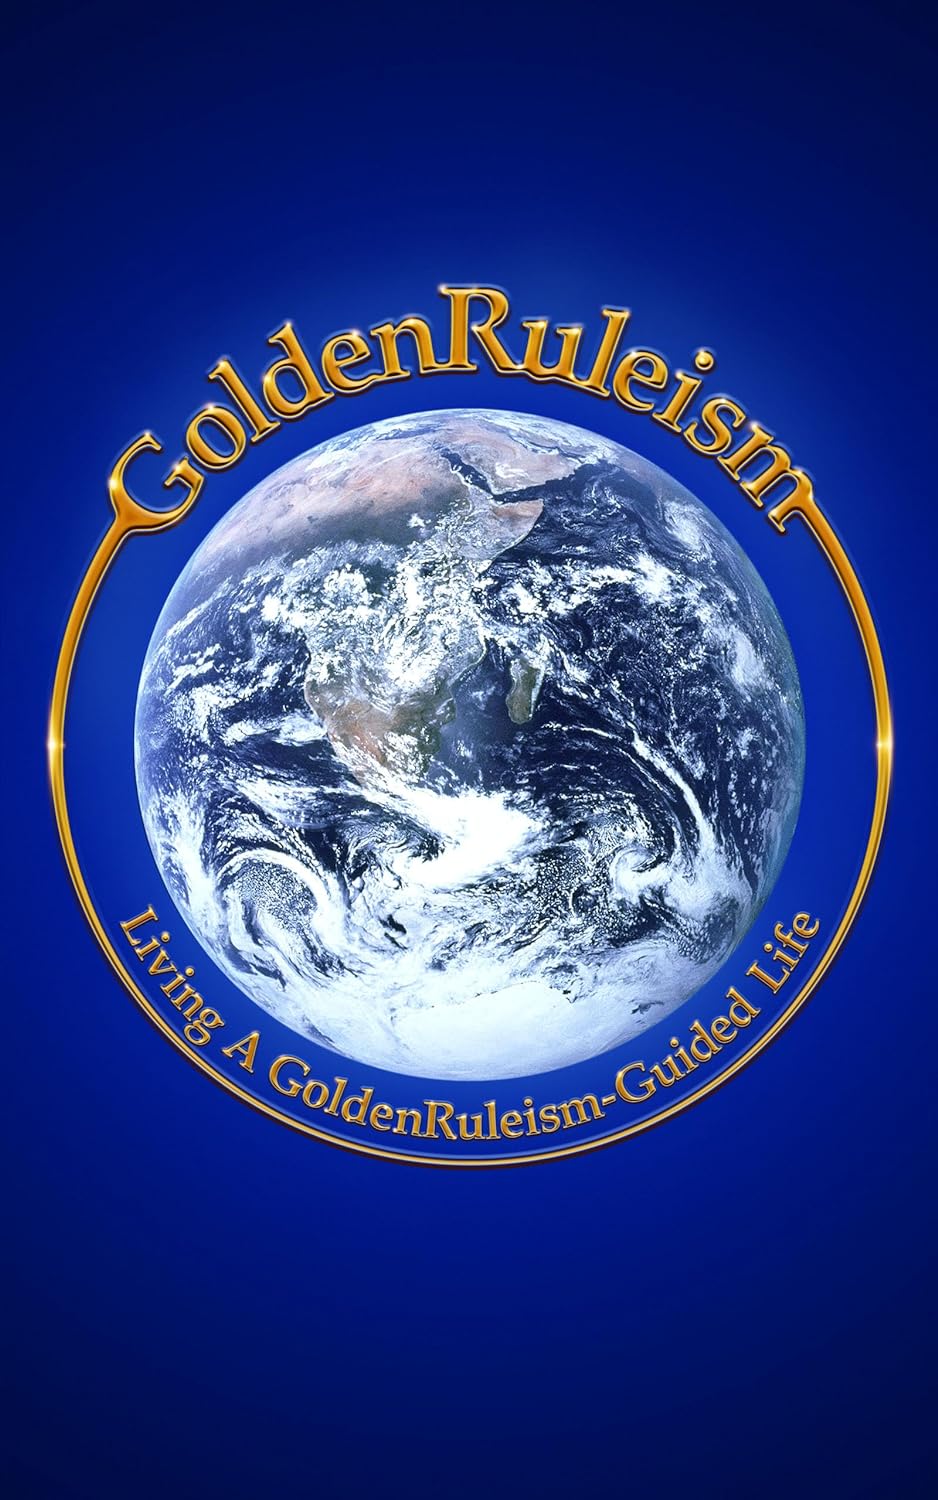 New booklet "GoldenRuleism" is released, a concise and compelling guide to the more friendly and humane world we attain by simply embracing the expanded application of "Humanity’s Number One Rule"